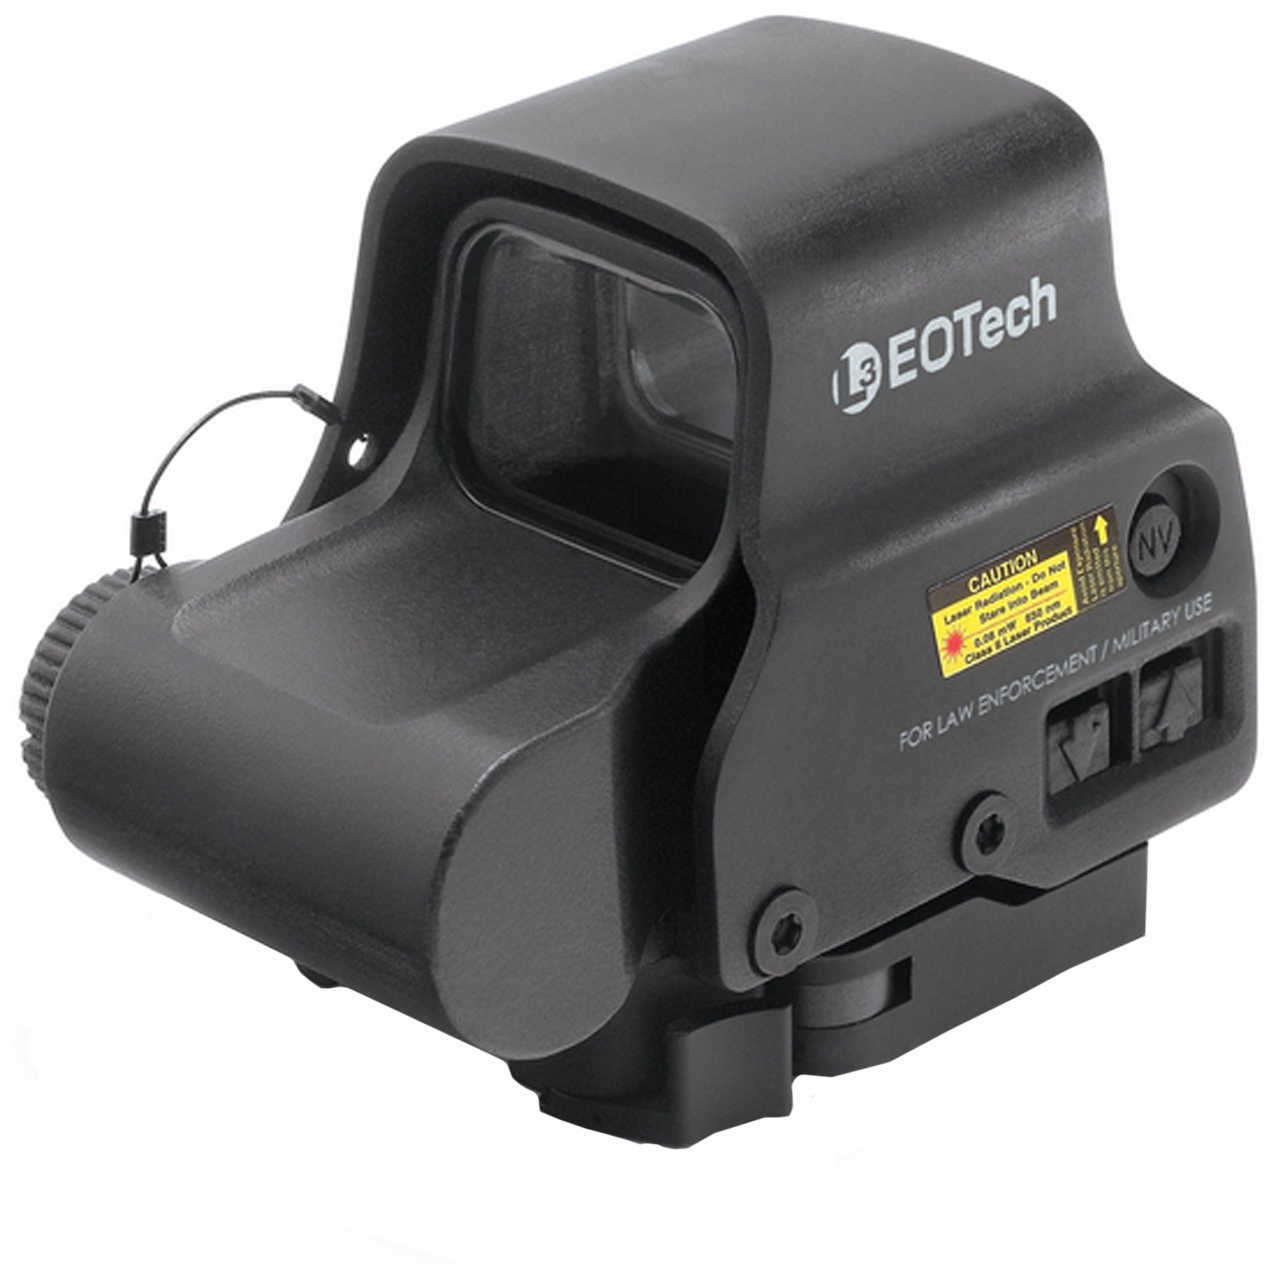 EOTech EXPS3-2 Holographic Red Dot Sight Black 68MOA Ring with Two 1MOA Dots CR123 Battery